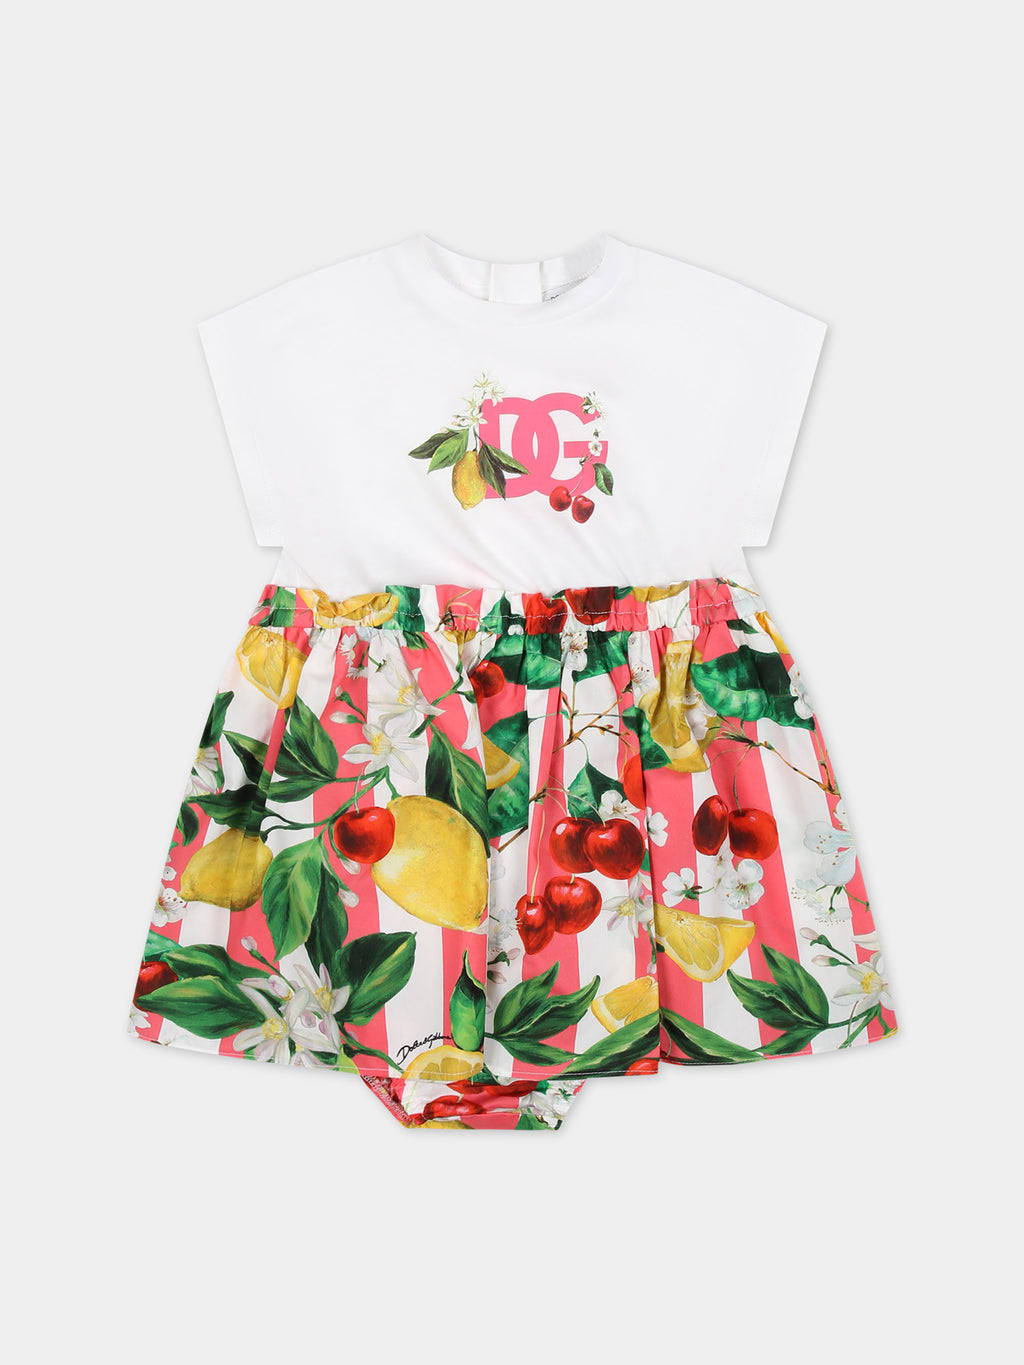 White dress for baby girl with all-over multicolor fruits and flowers